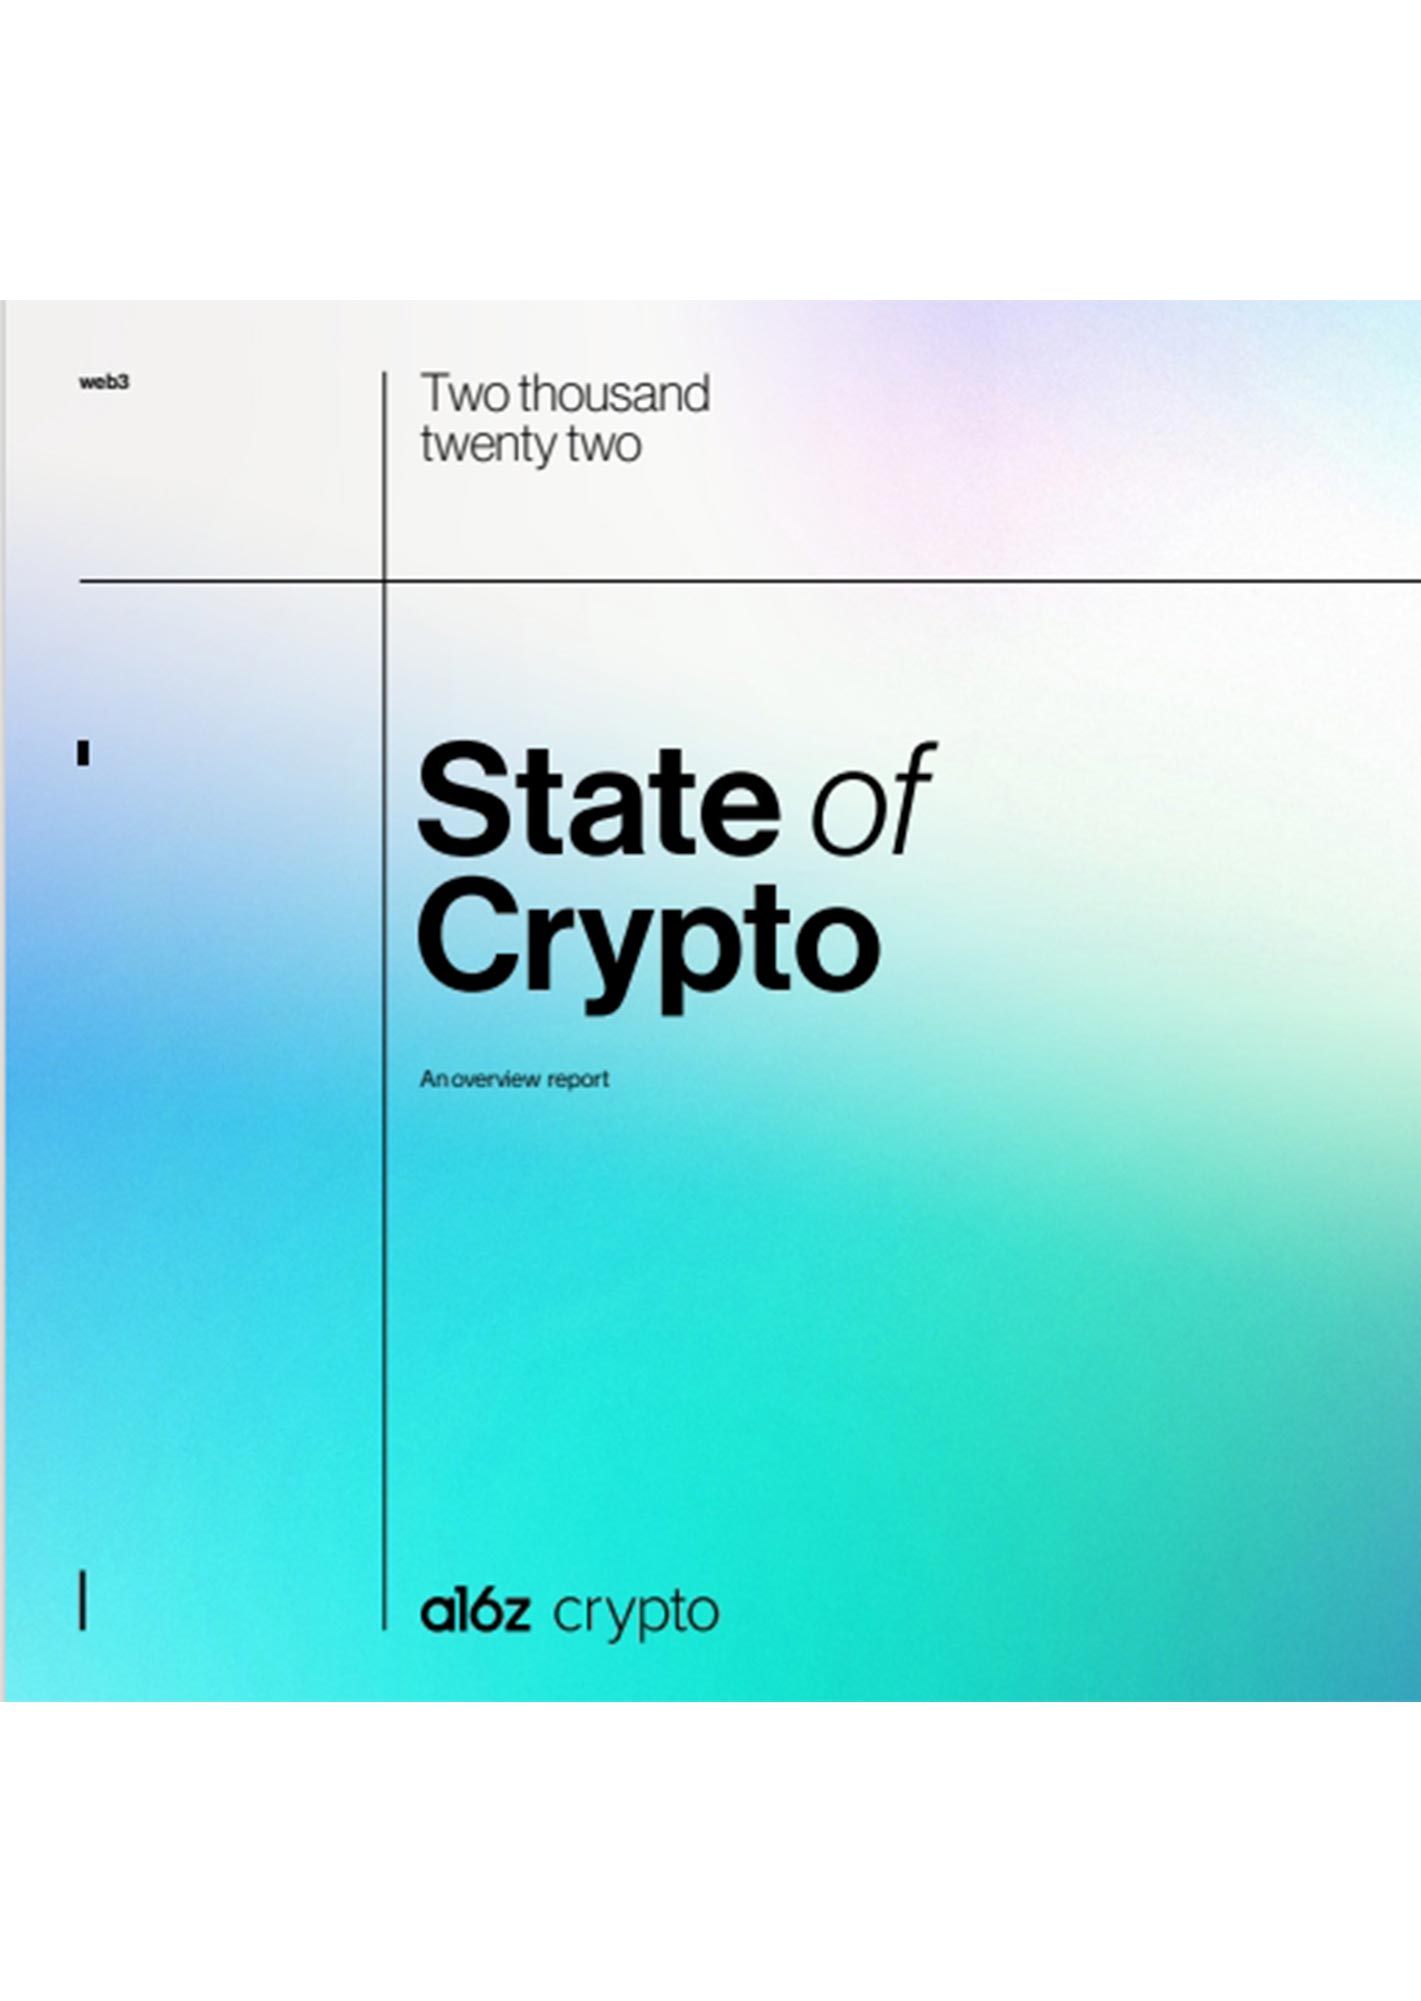 State of Crypto Overview Report